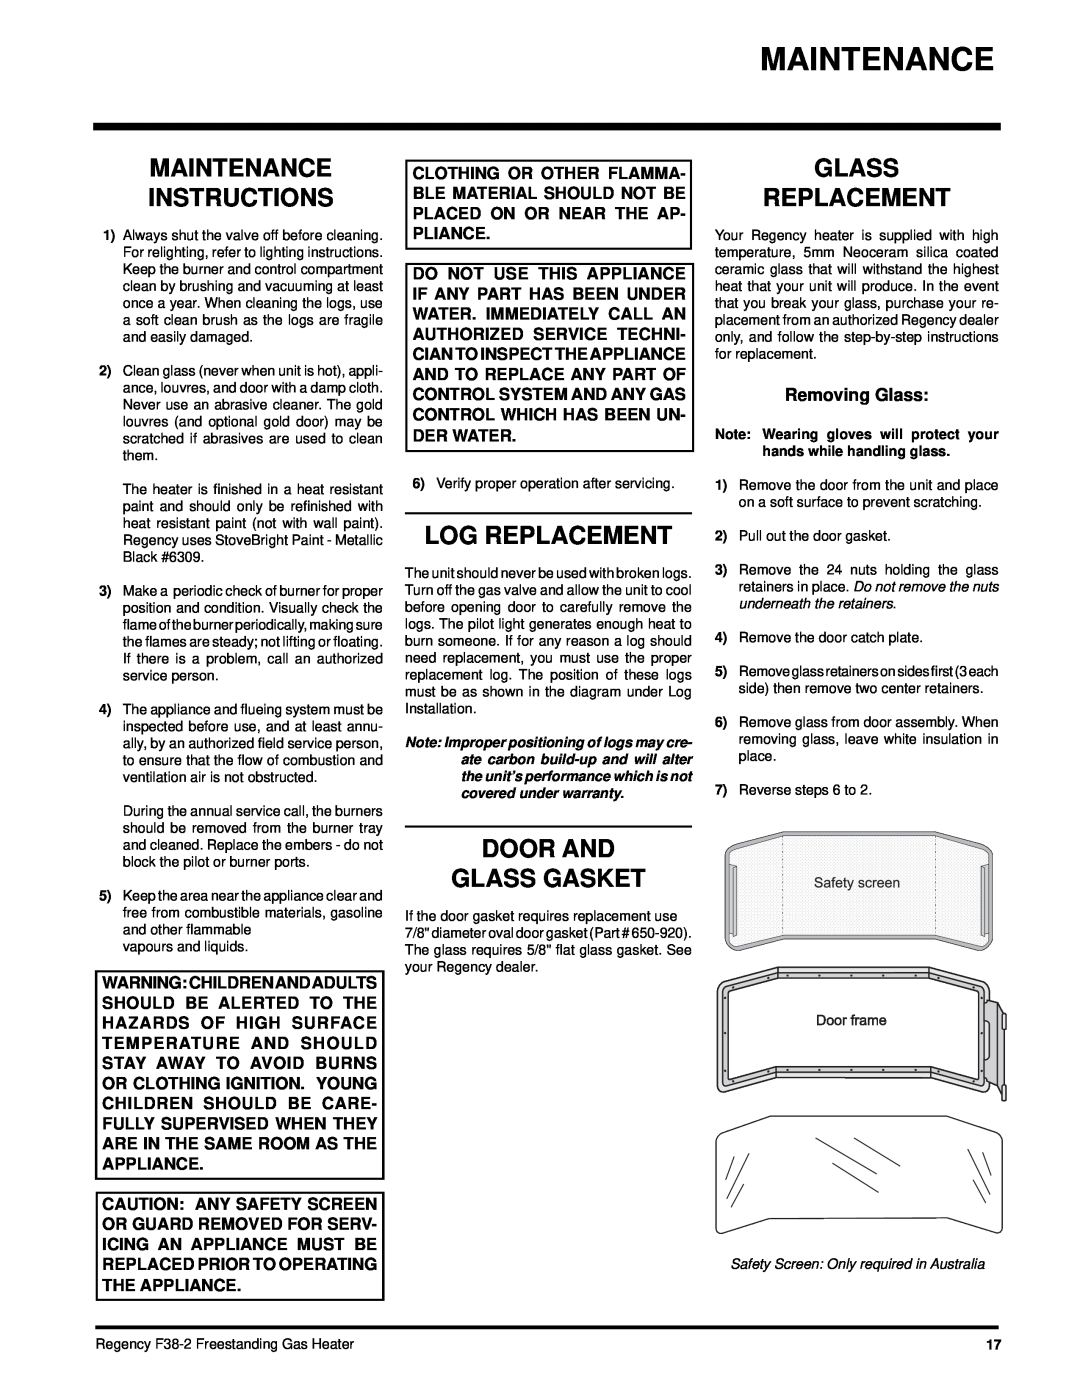 Regency F38-LPG2, F38-NG2 Maintenance Instructions, Log Replacement, Door And Glass Gasket, Glass Replacement 